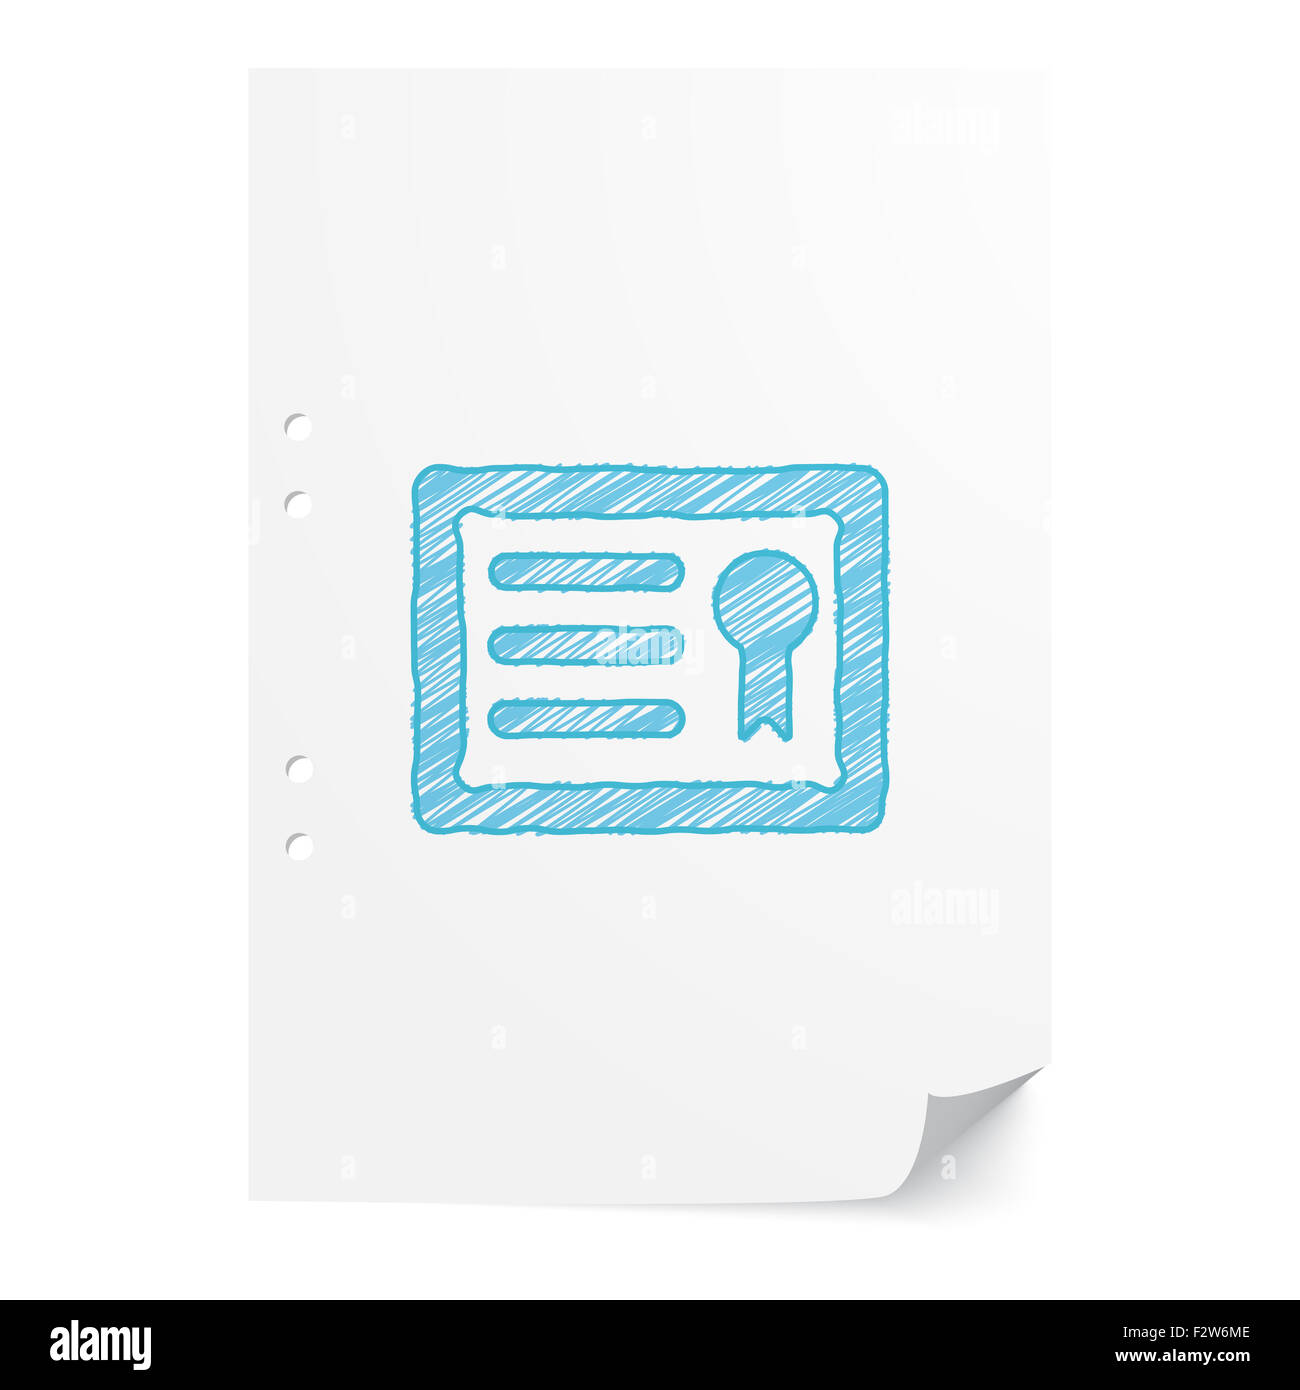 Blue handdrawn Diploma illustration on white paper sheet with copy space Stock Photo